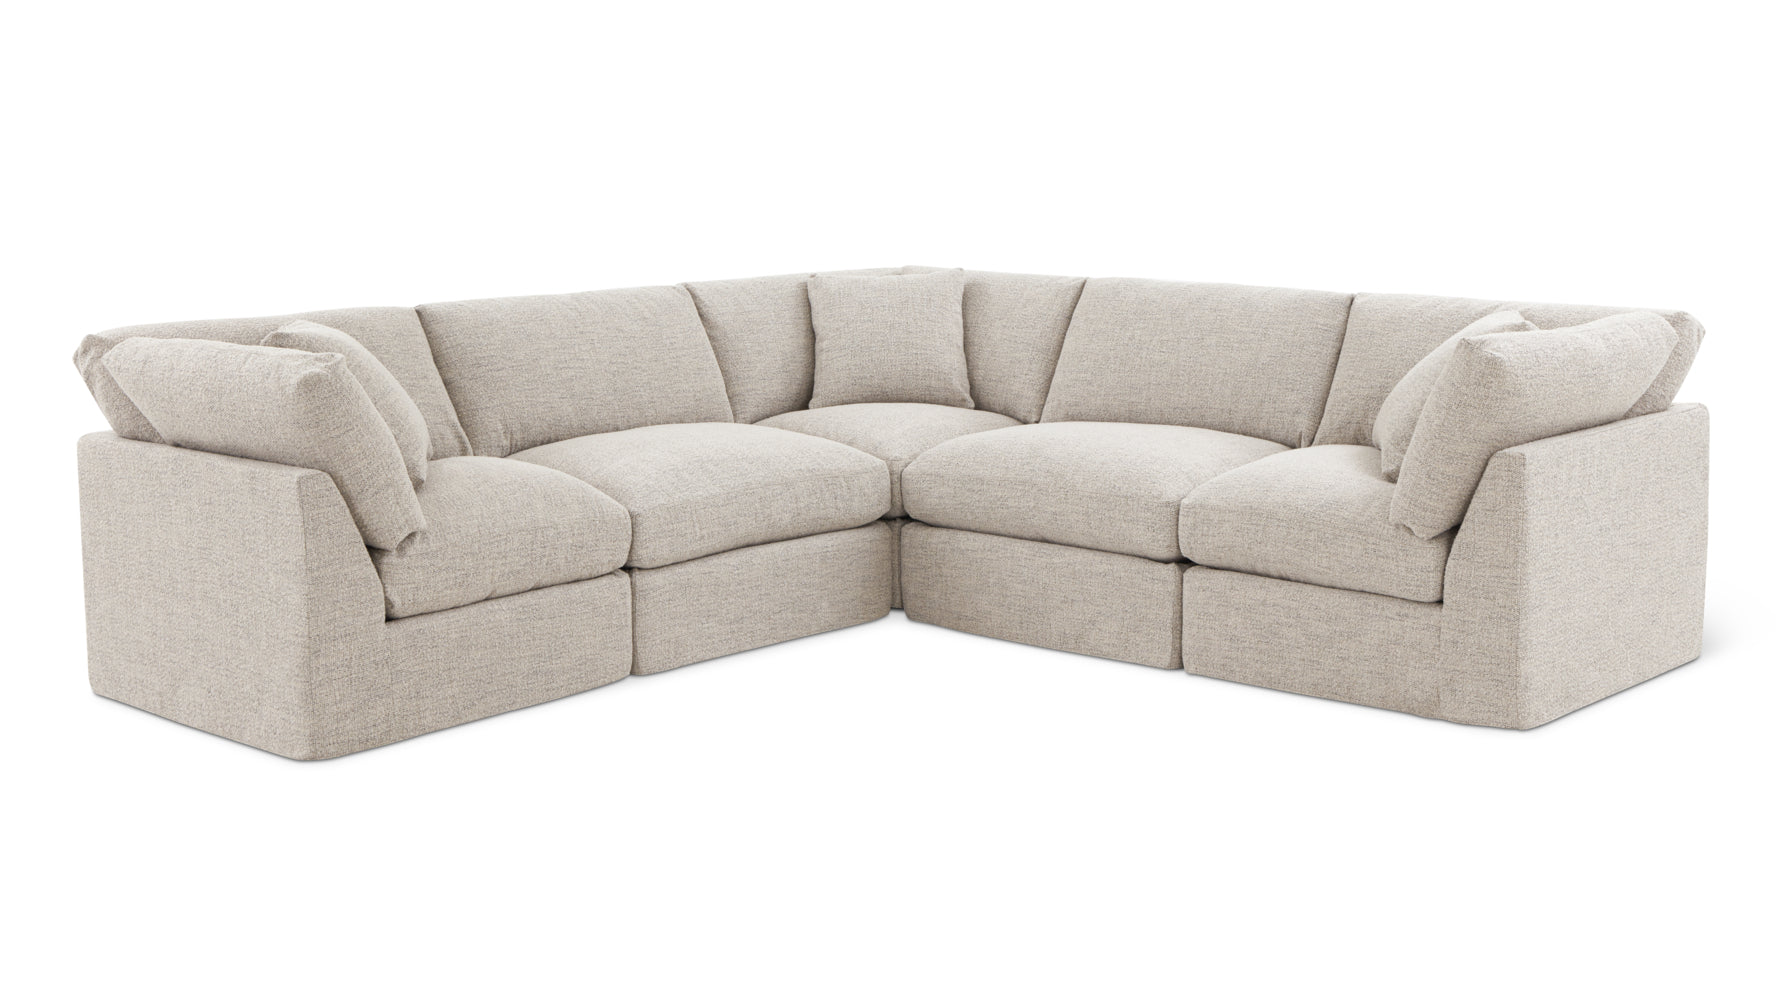 Get Together™ 5-Piece Modular Sectional Closed, Standard, Oatmeal - Image 2